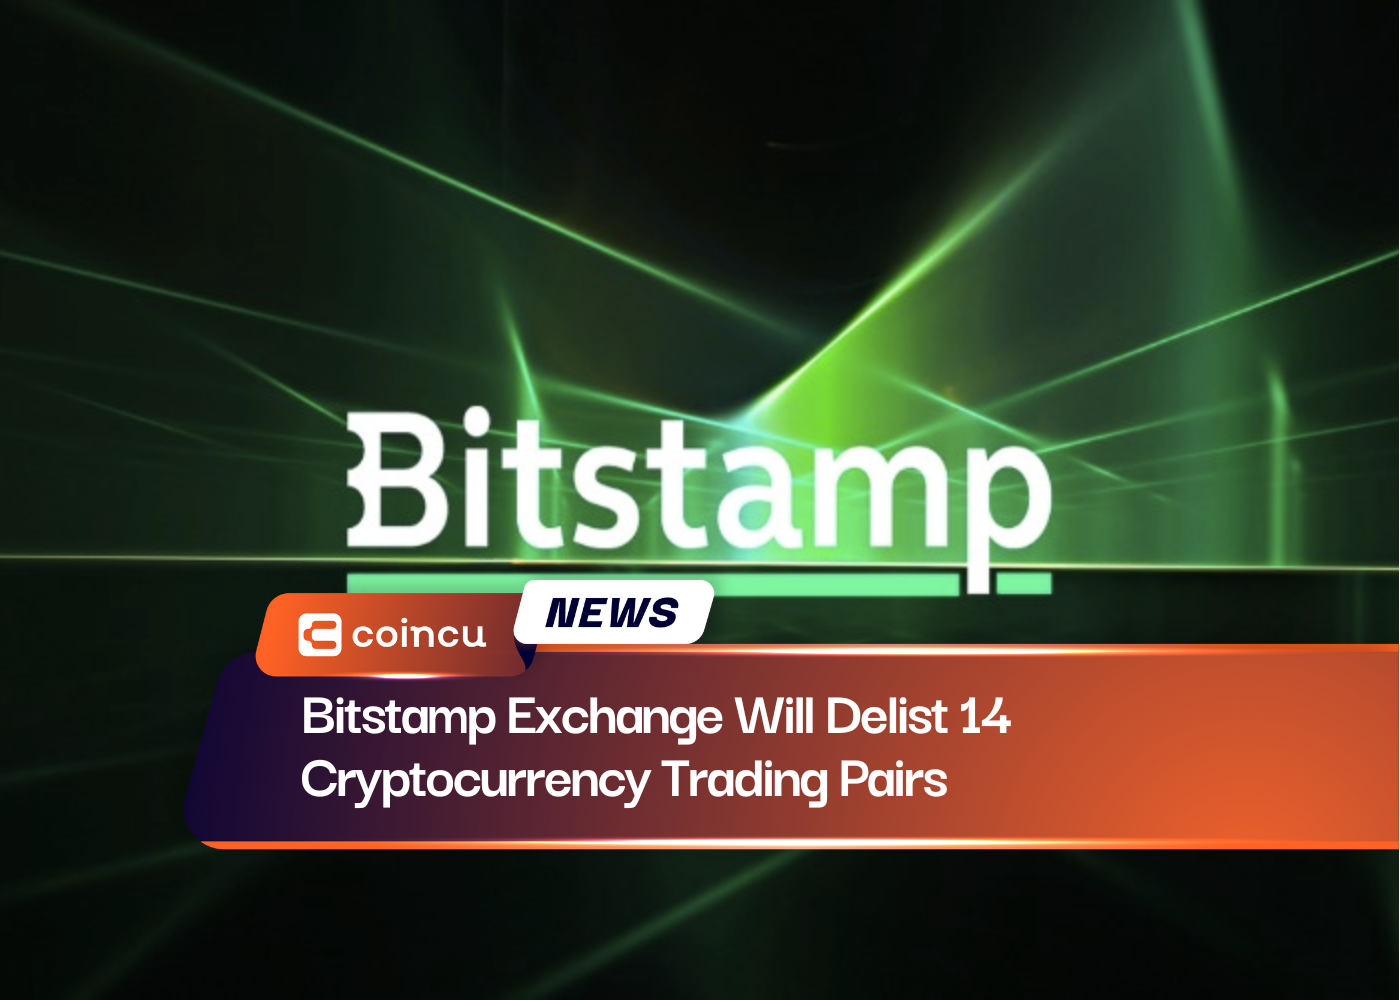 Bitstamp Exchange Will Delist 14 Cryptocurrency Trading Pairs